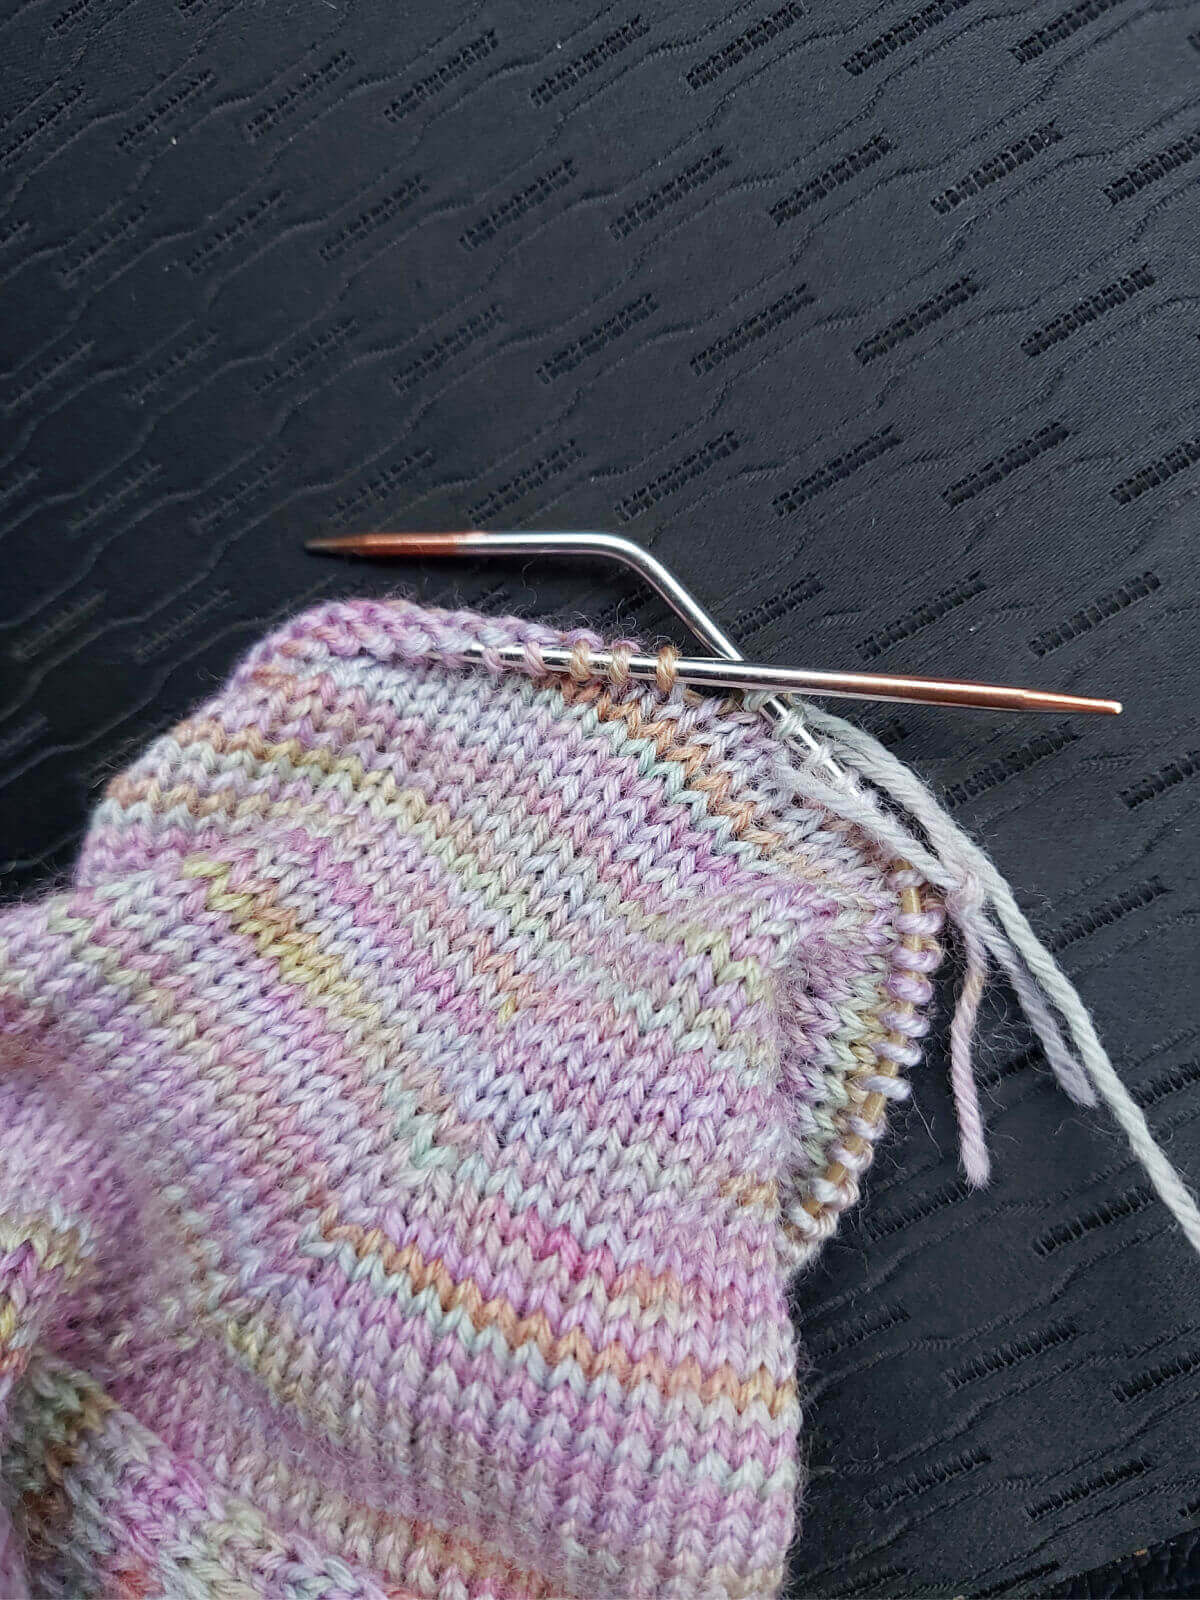 A partly-knitted sock on a short circular needle resting on a black car seat. One of the needle tips is bent at nearly 90 degrees.